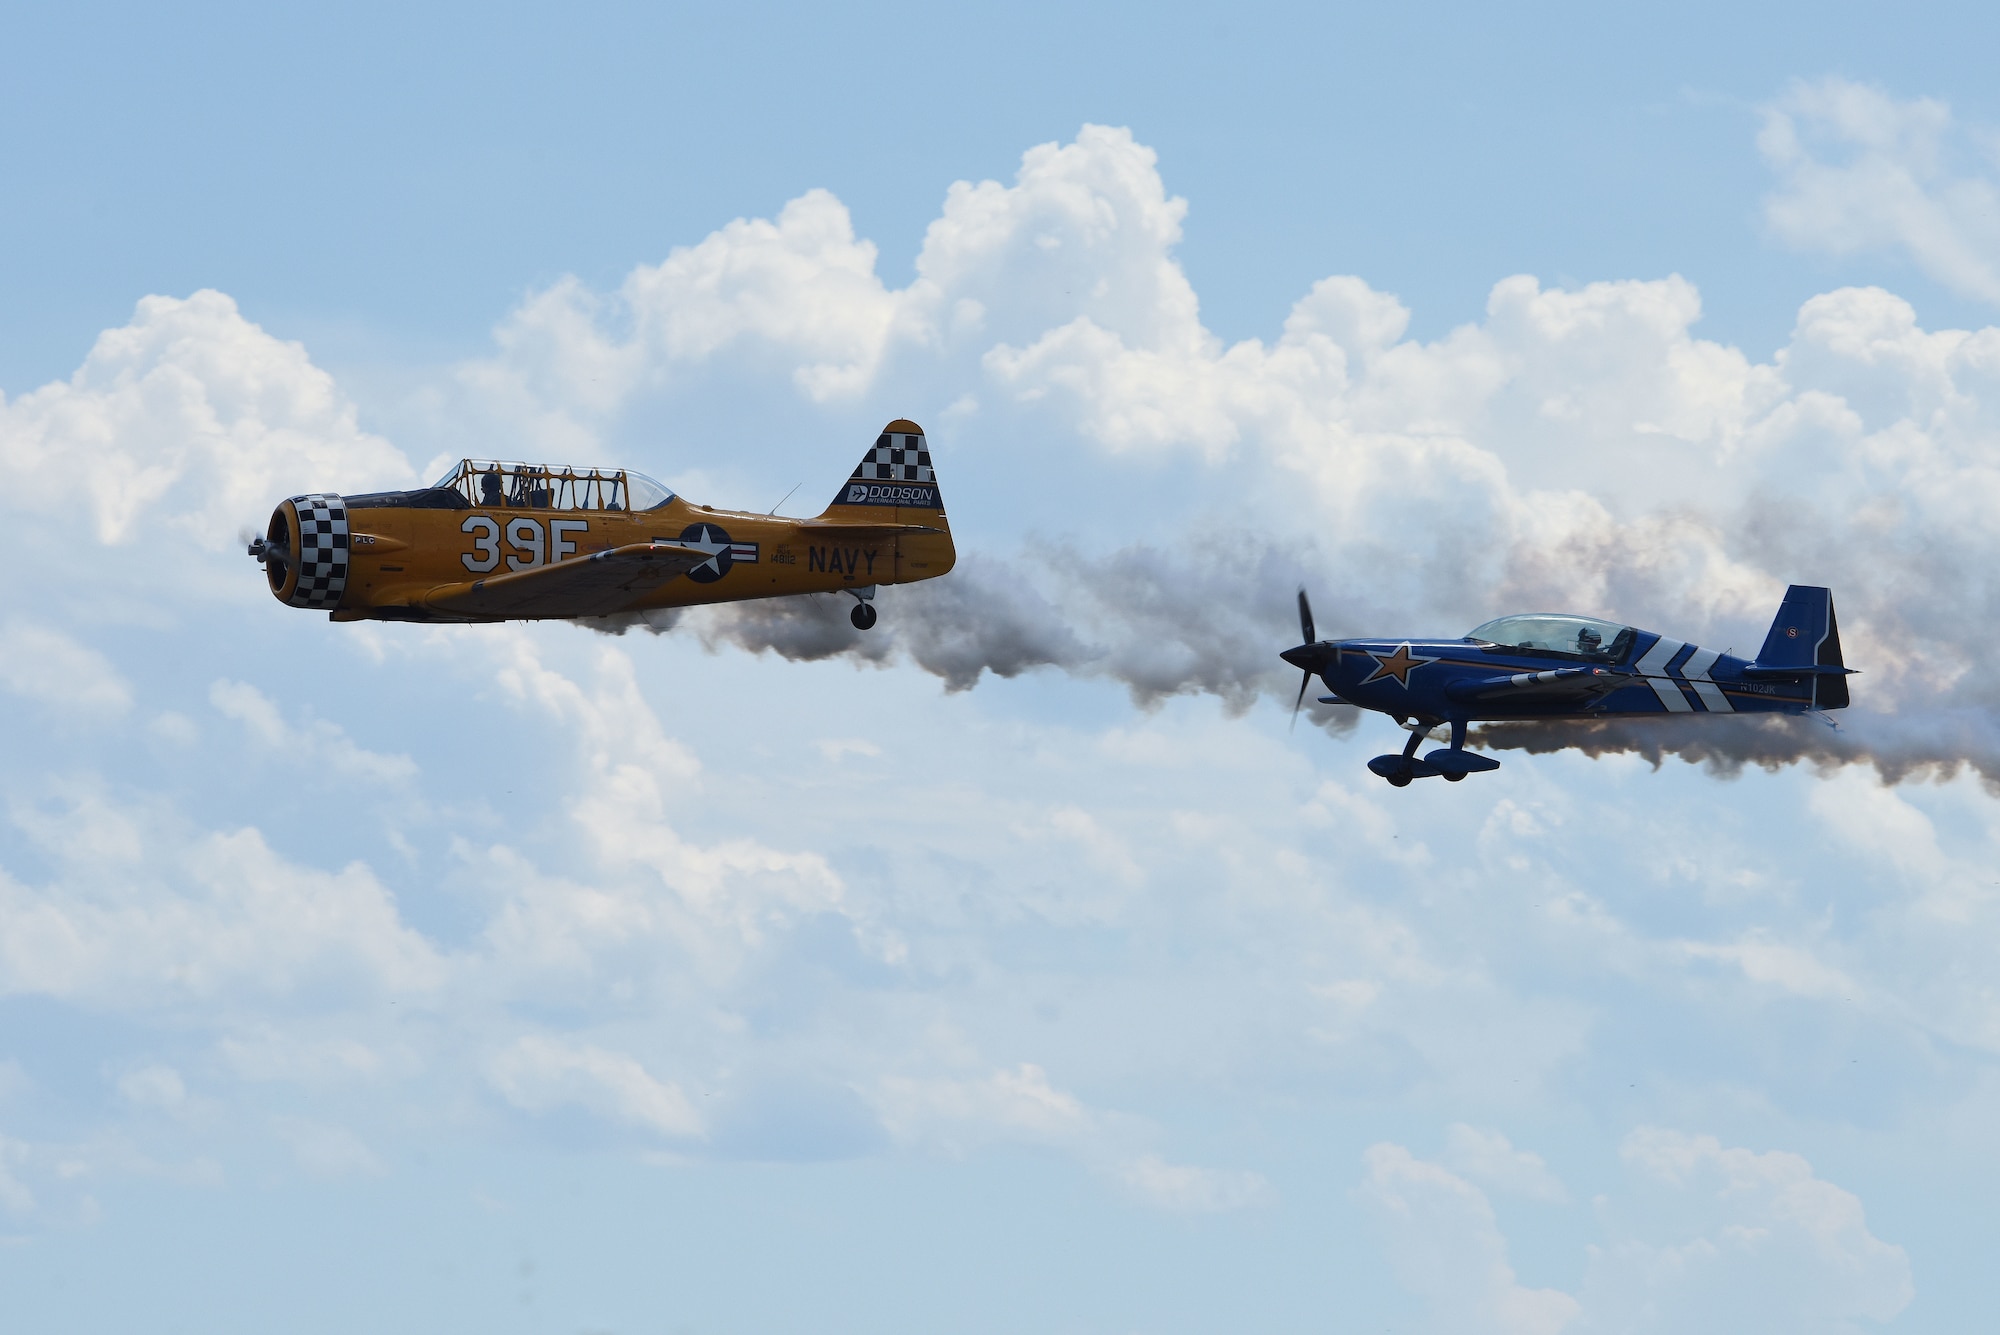 The Shetterly Squadron aerial group perform stunts July 13, 2019, at the “Mission Over Malmstrom” open house event on Malmstrom Air Force Base, Mont.